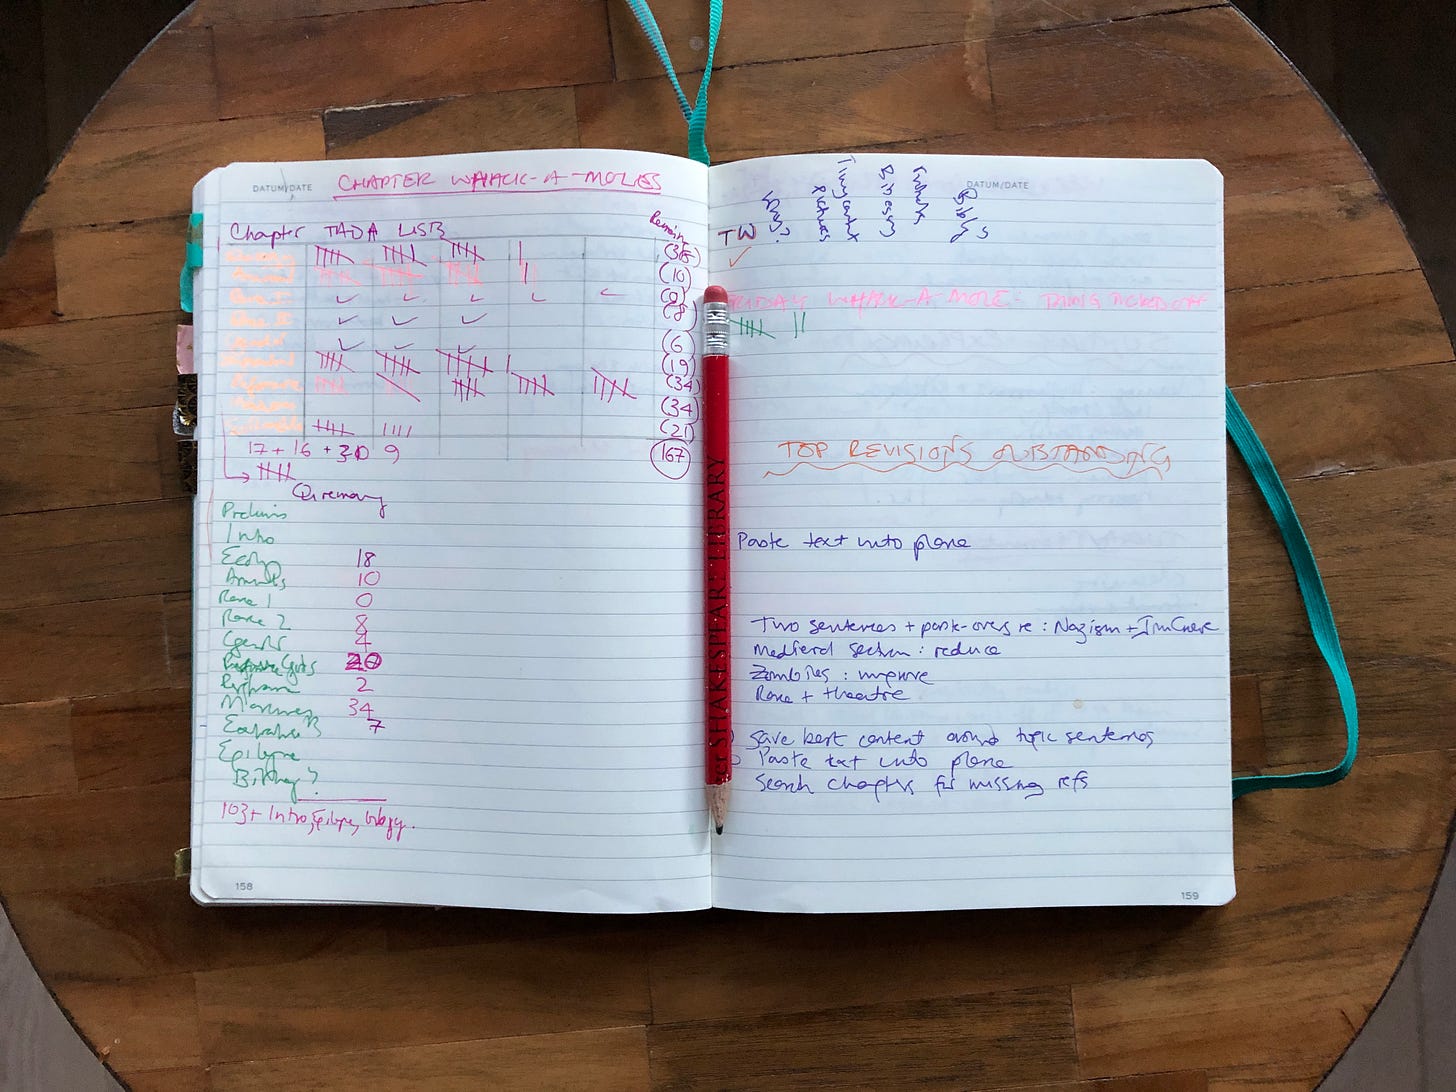 Two-page spread of a notebook showing task check-lists and instructions - chapter whack-a-moles.